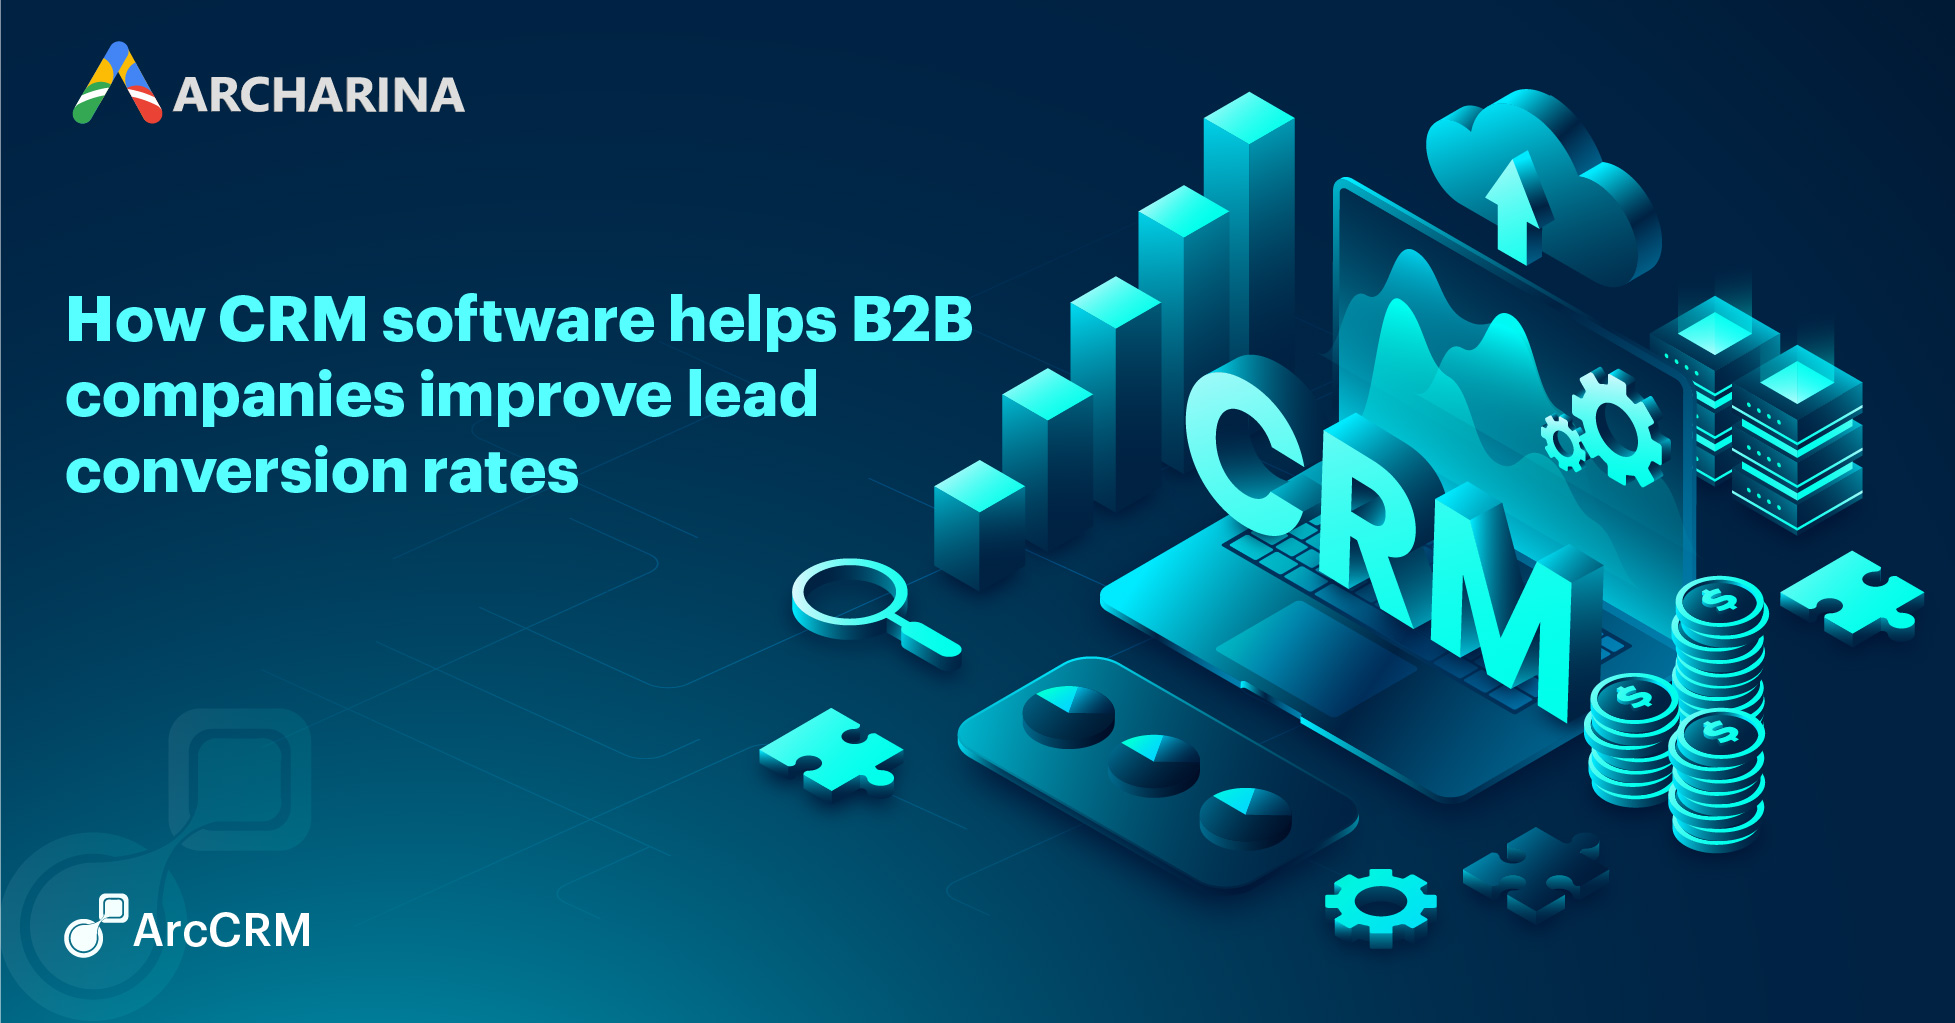 How CRM software helps B2B companies improve lead conversion rates